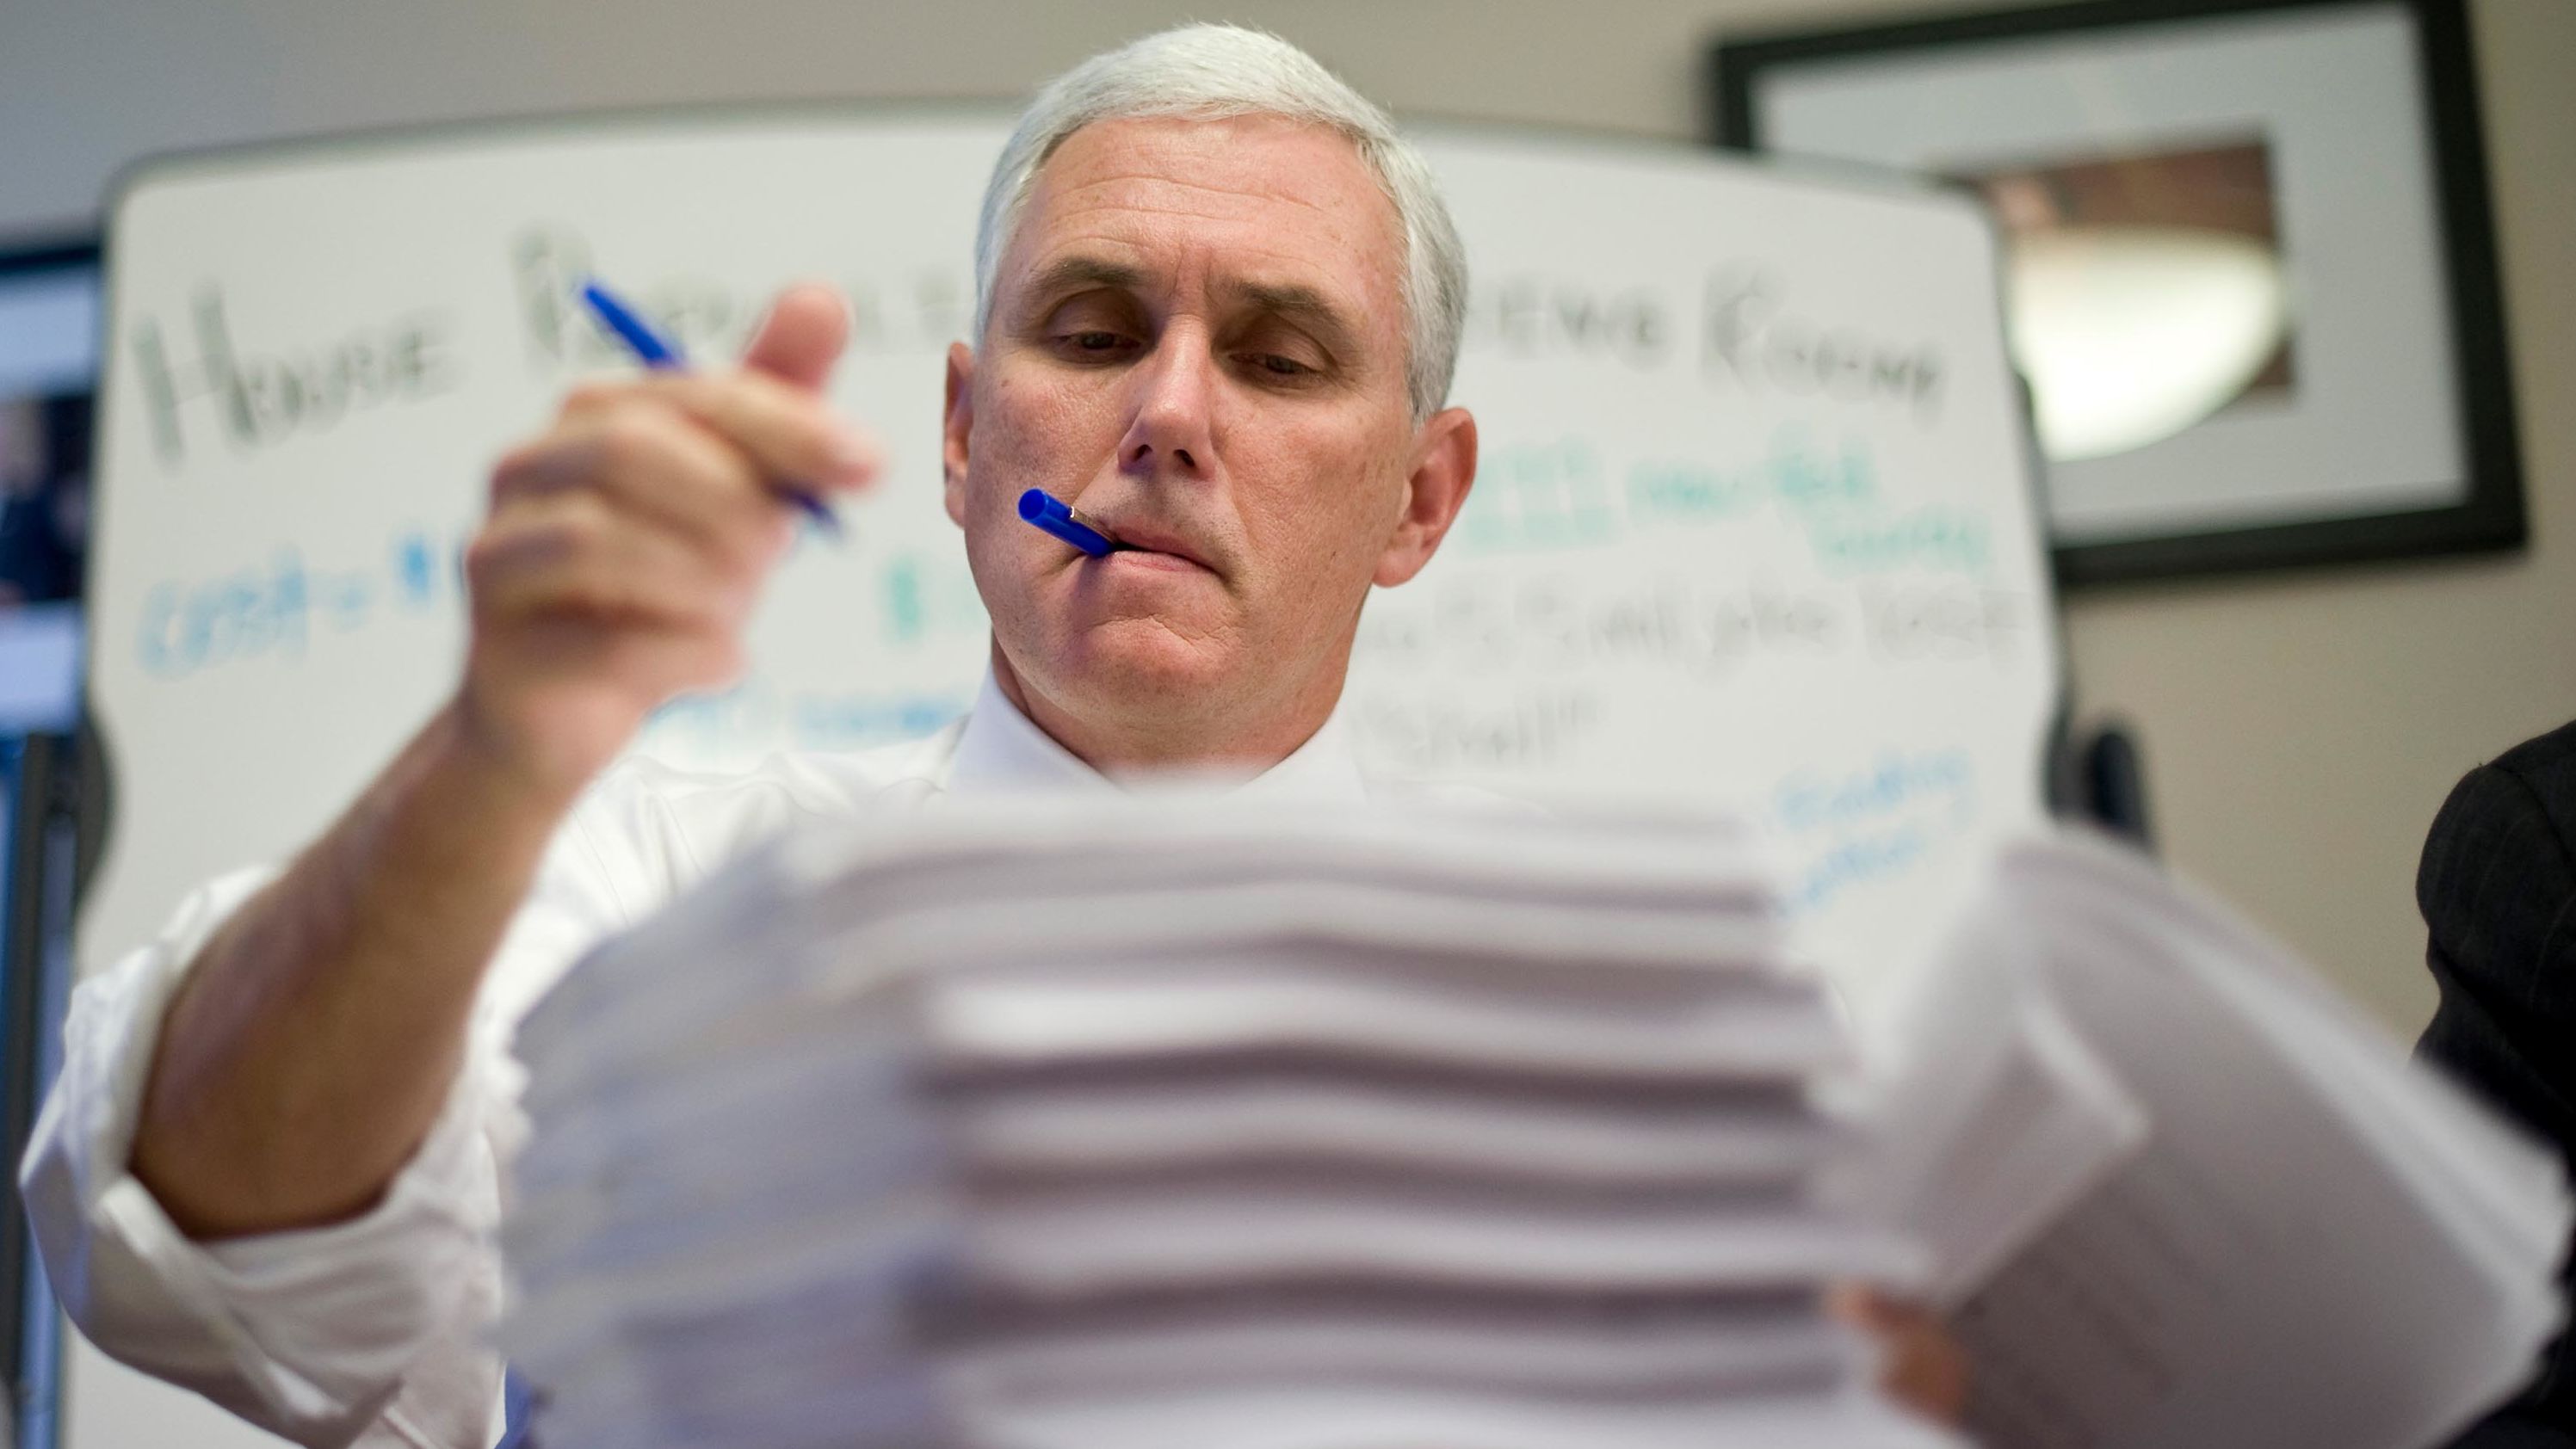 Pence makes marks on a House health-care bill in 2009.